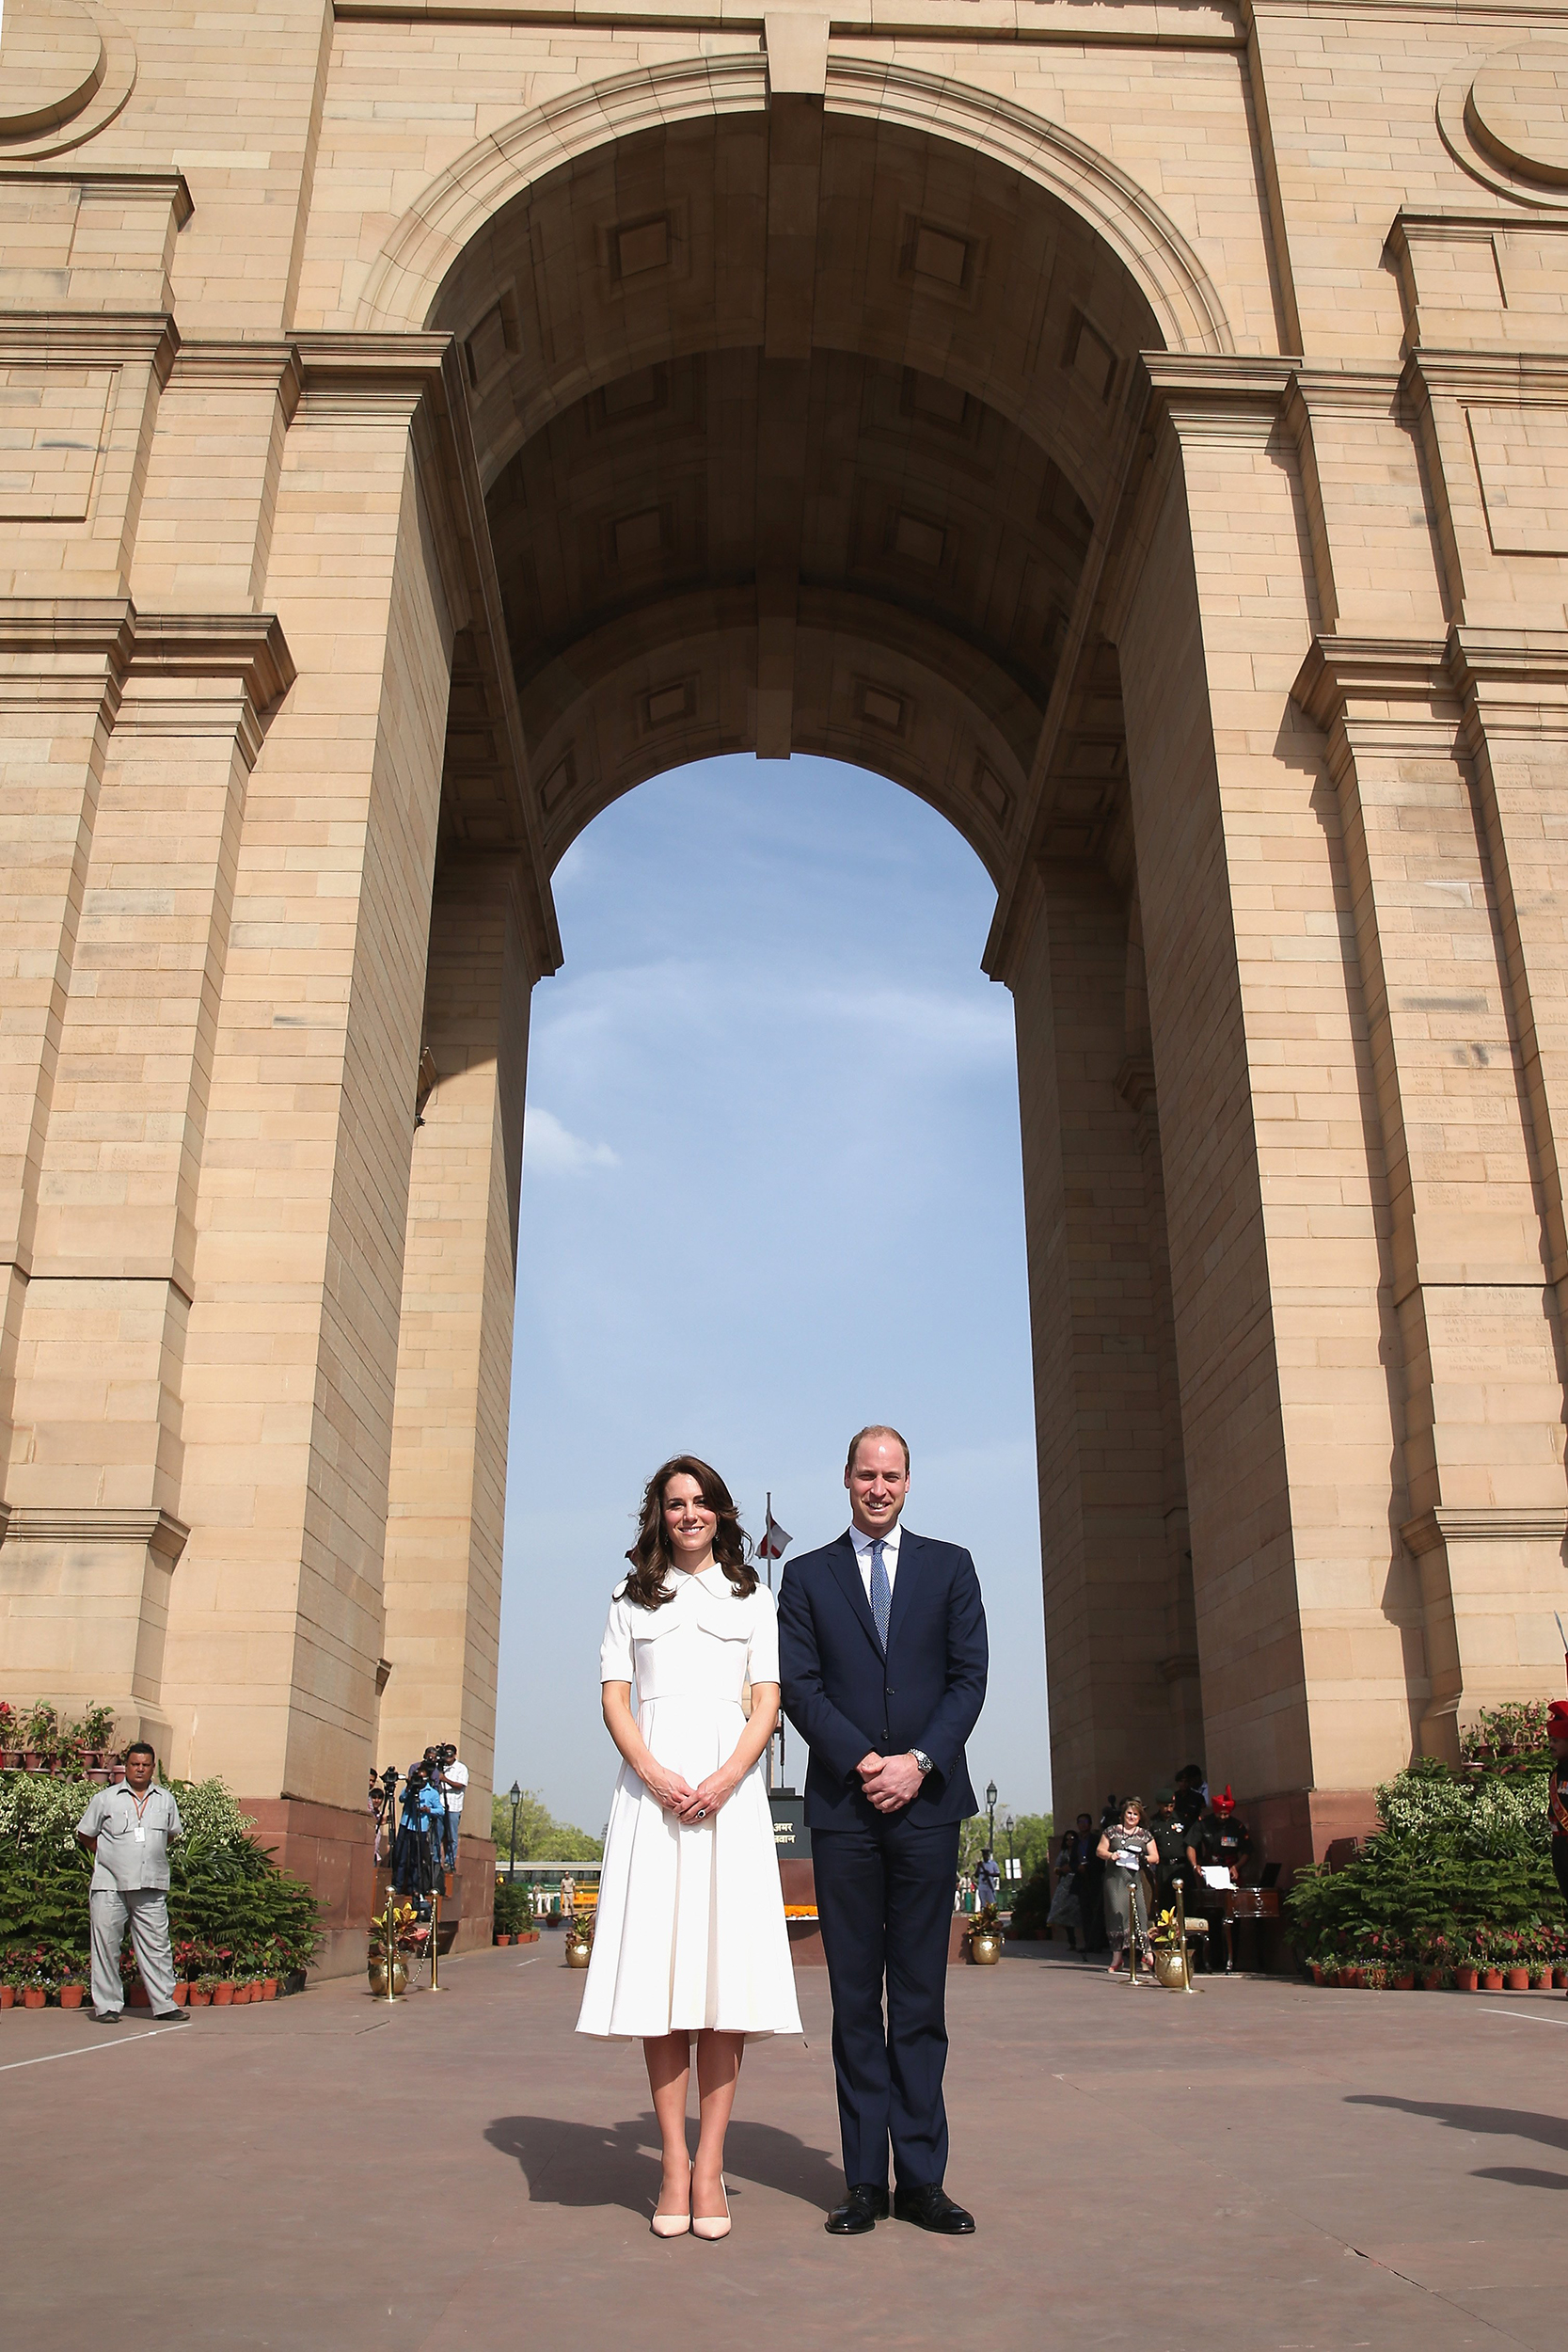 Catherine, Duchess of Cambridge and Prince William, Duke of Cambridge lay a wreath to honor the soldiers from Indian regiments who served in World War I, at India Gate, during the royal visit to India and Bhutan on April 11, 2016.